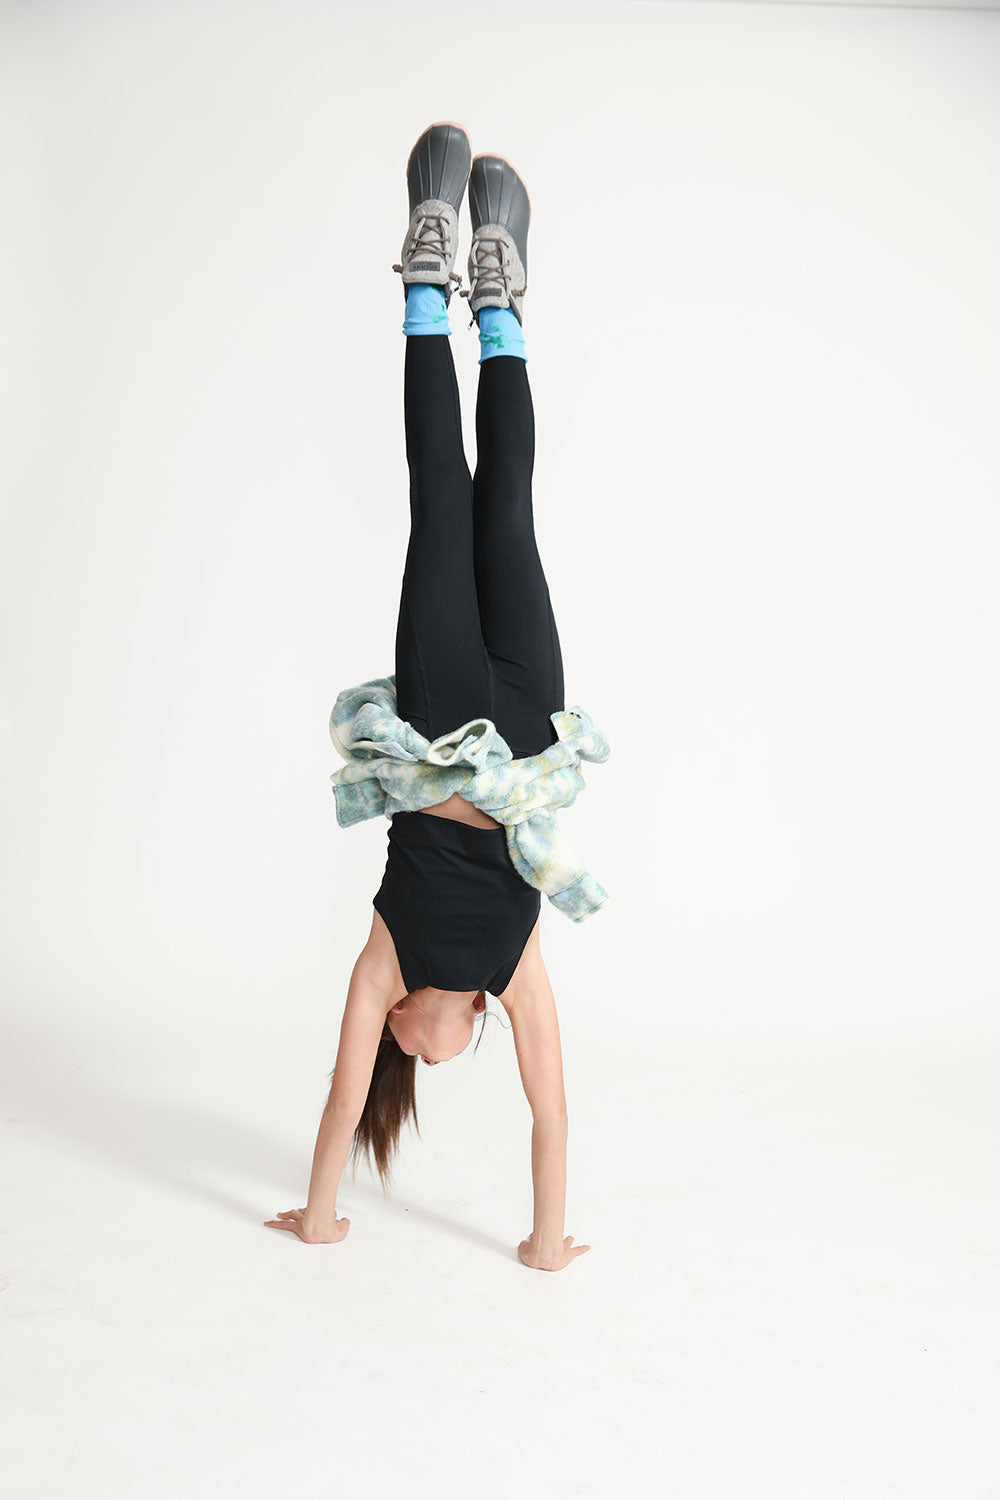 Young girl doing a headstand wearing Everyway kids activewear. Featuring black Longline Crop and All Day Leggings.